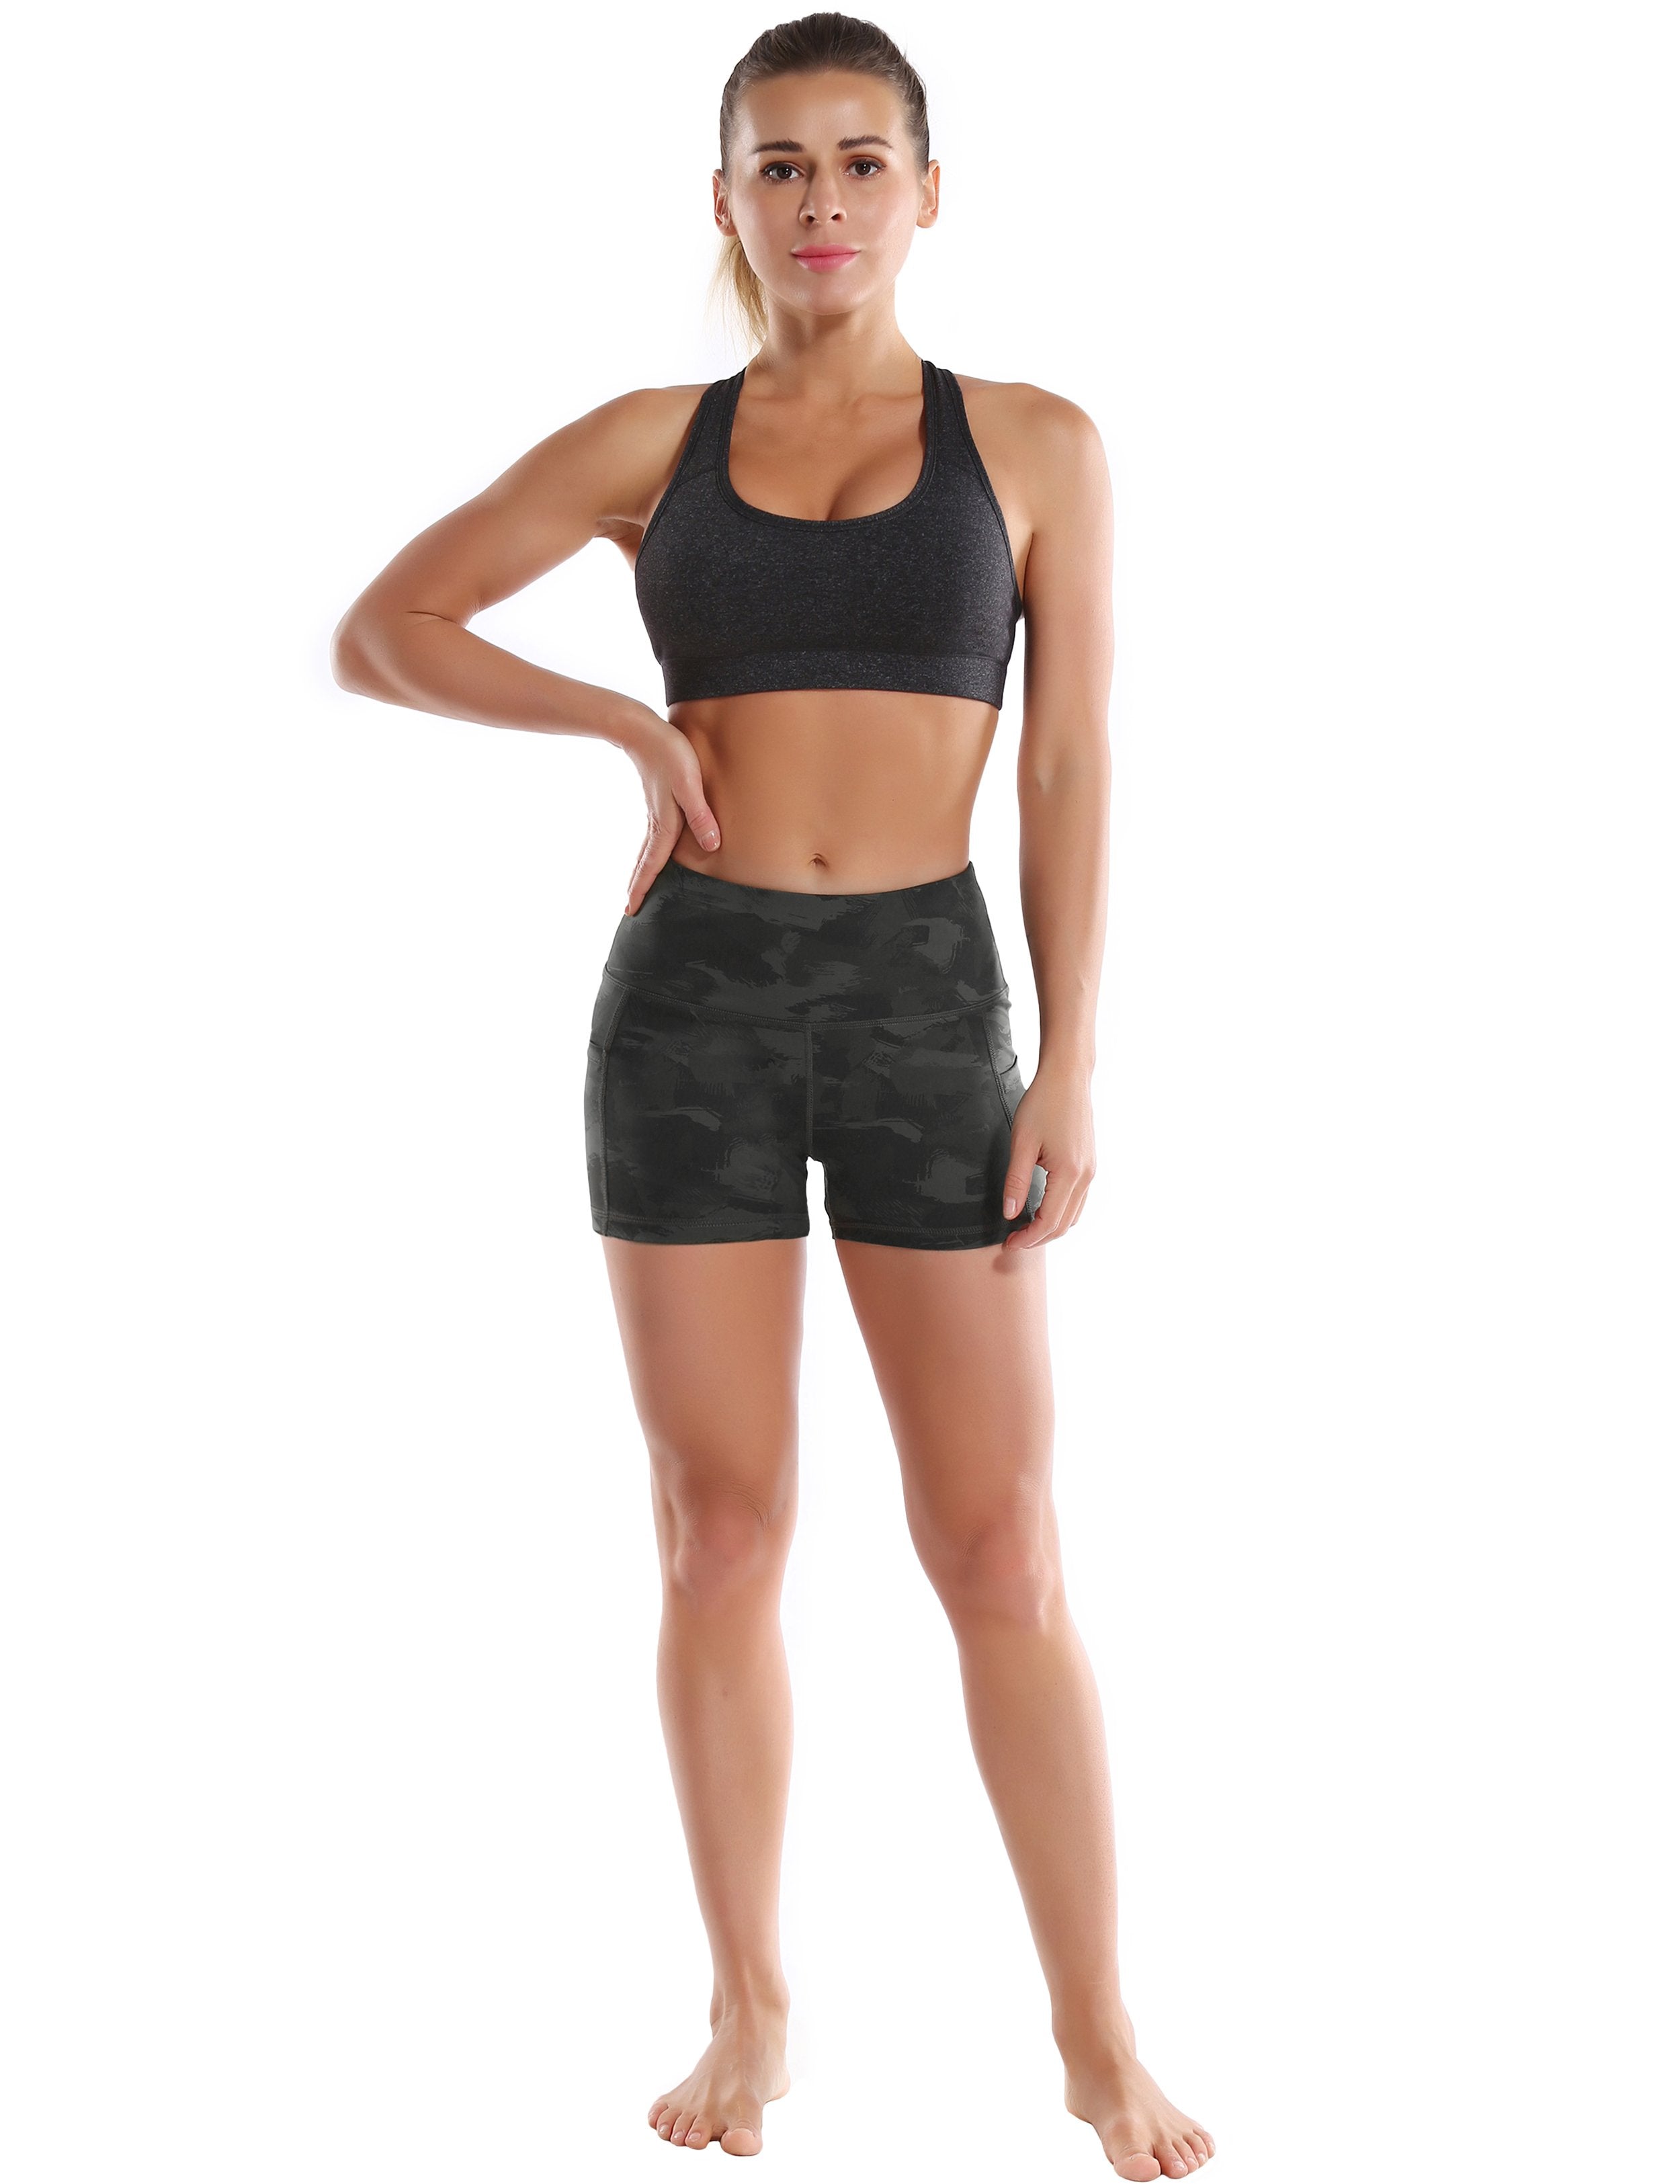 2.5" Printed Side Pockets Gym Shorts dimgray brushcamo Sleek, soft, smooth and totally comfortable: our newest sexy style is here. Softest-ever fabric High elasticity High density 4-way stretch Fabric doesn't attract lint easily No see-through Moisture-wicking Machine wash 78% Polyester, 22% Spandex